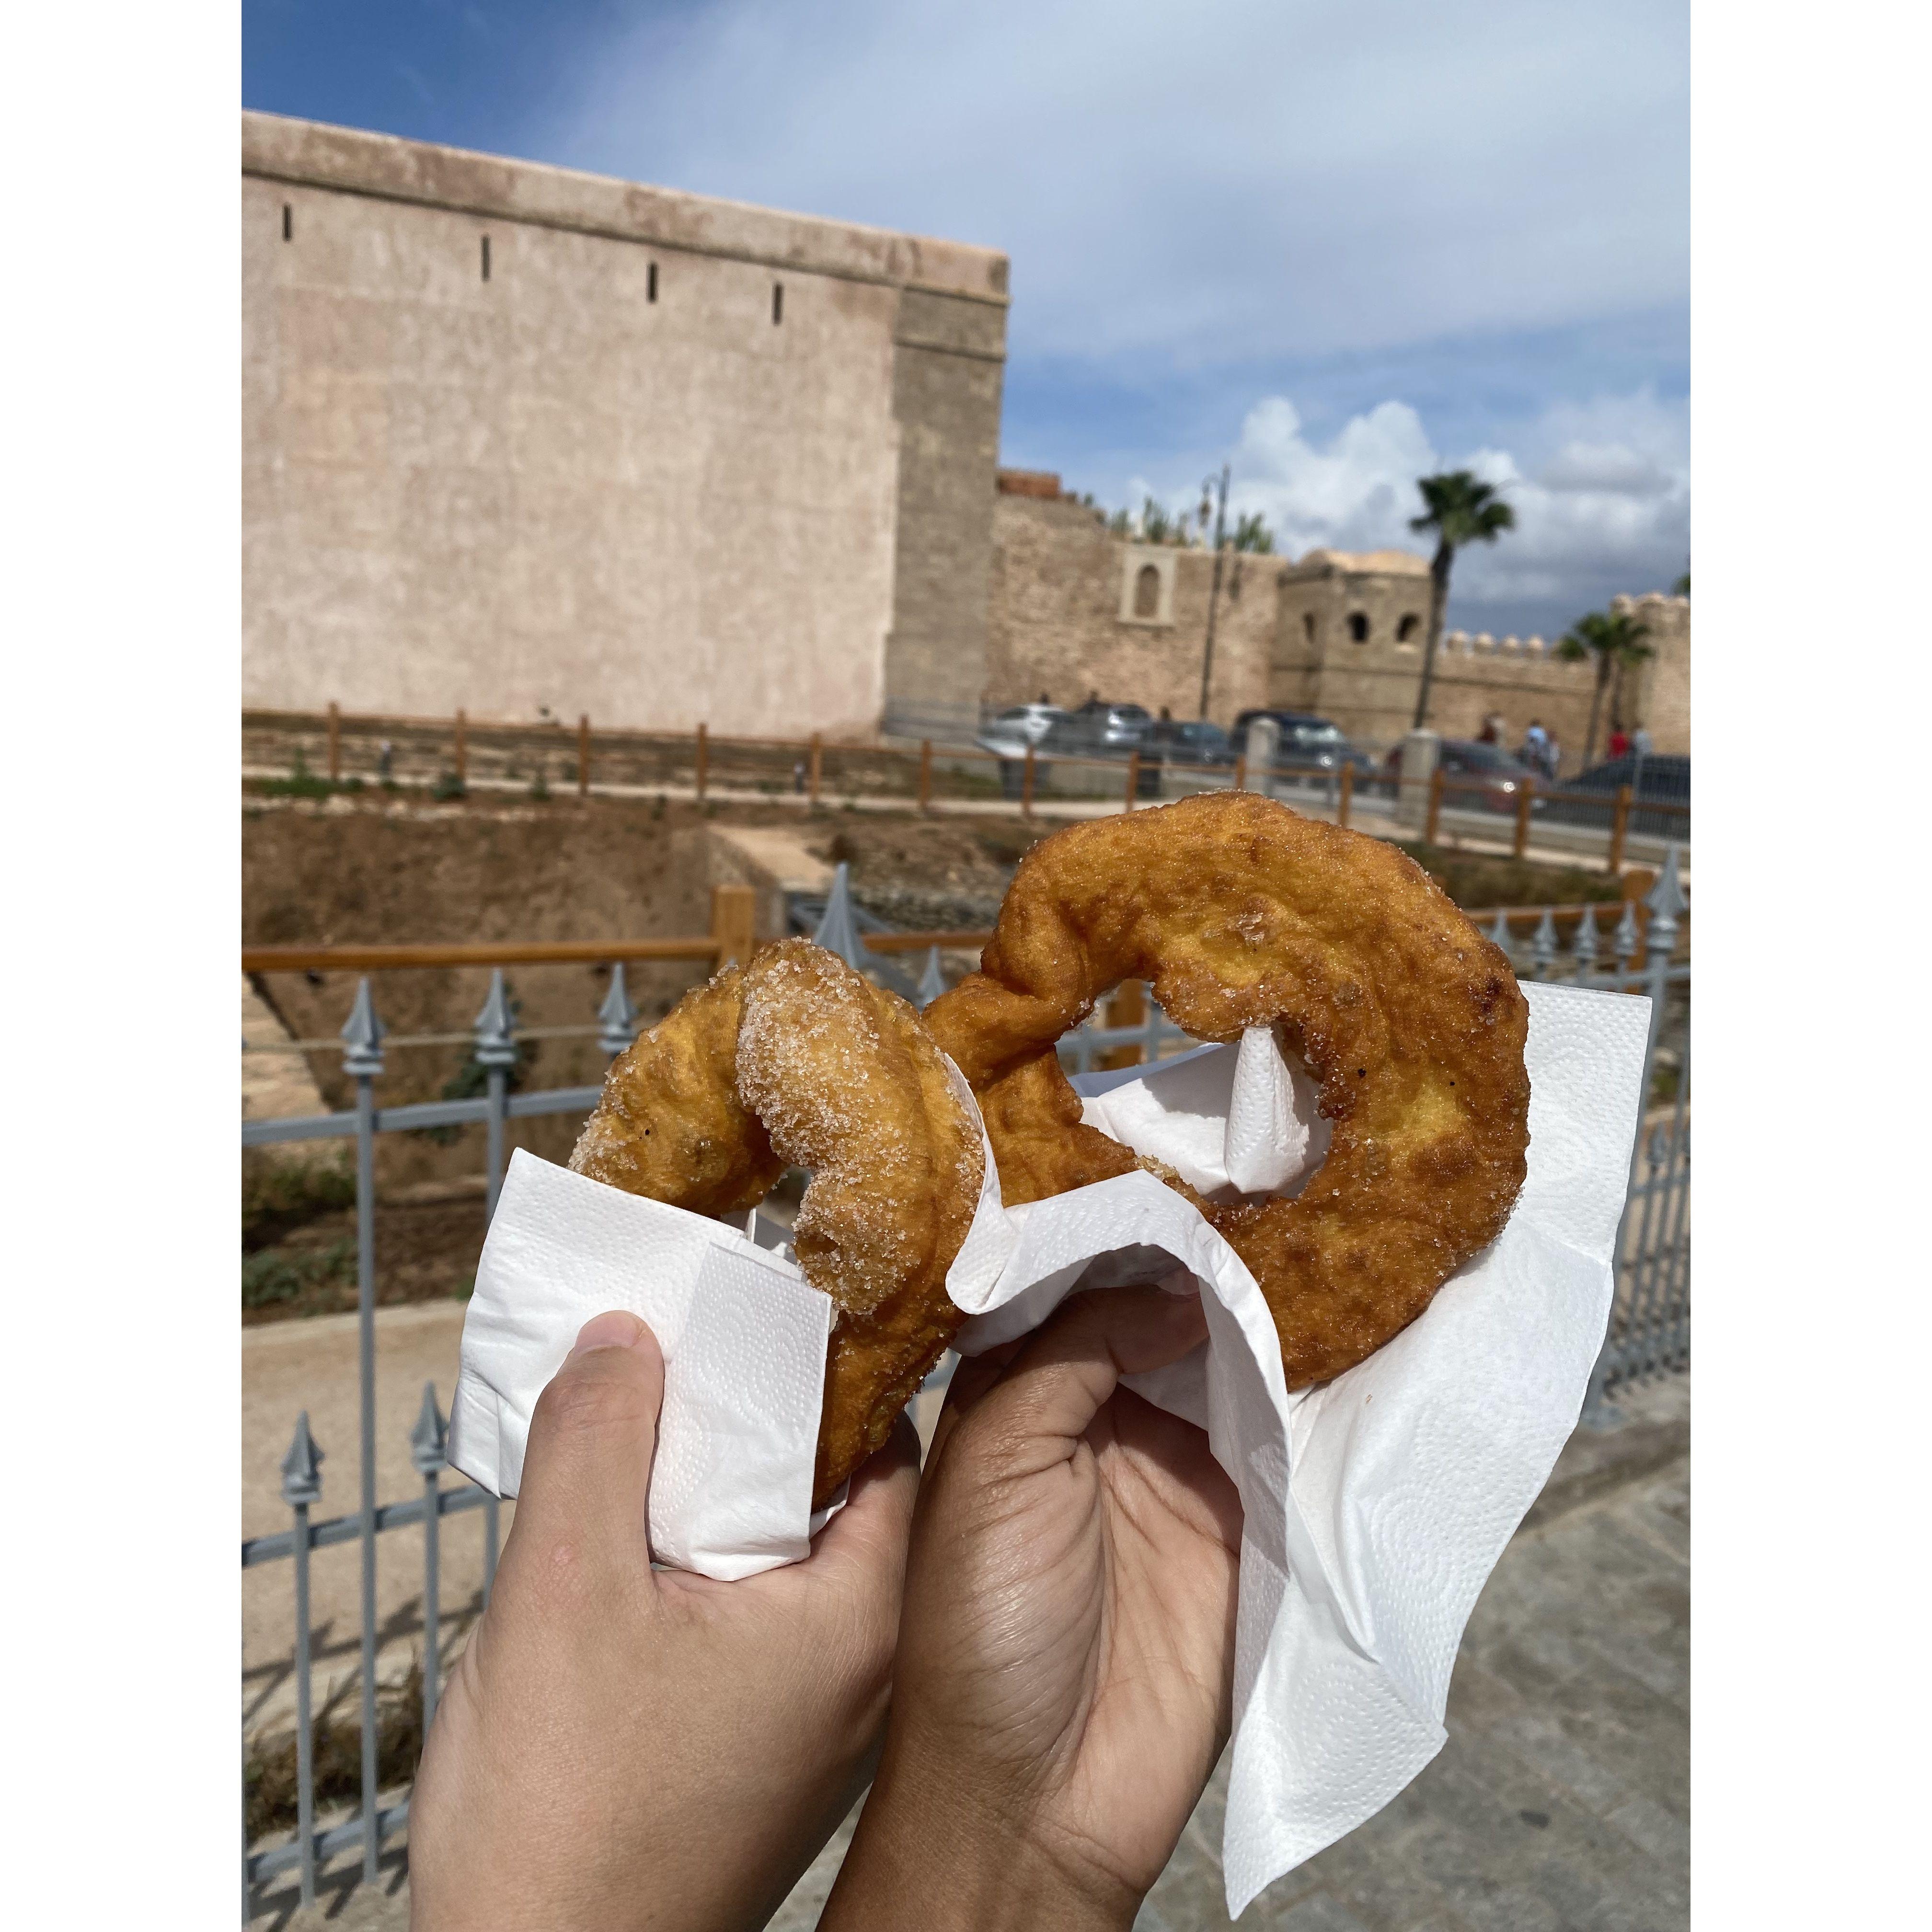 Sfenj (fried deliciousness) outside the Kasbah